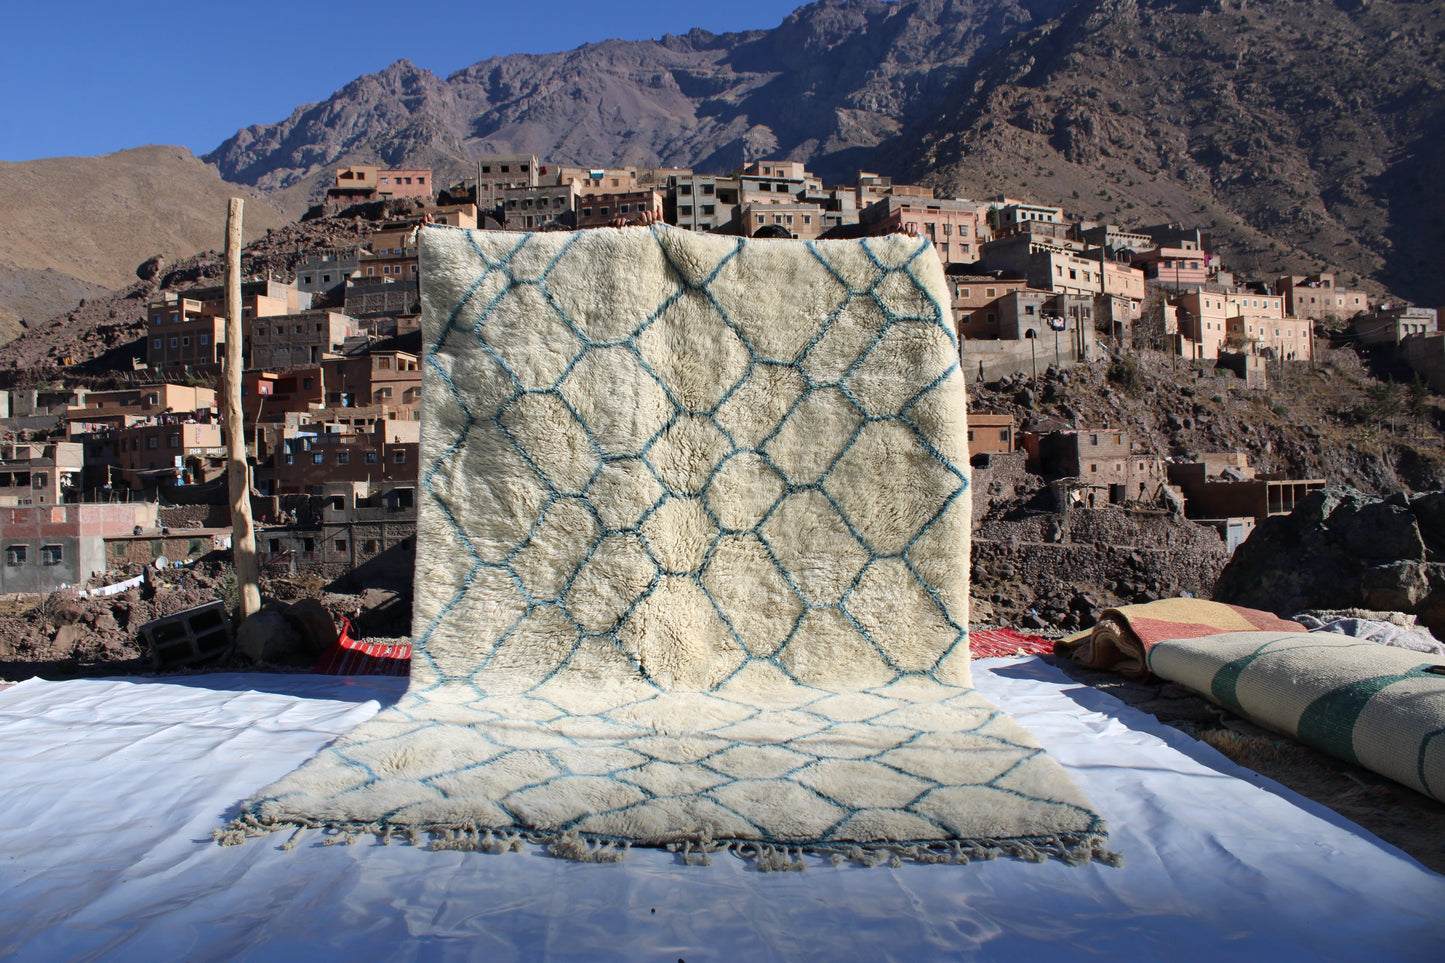 Beni Ourain rugs originate from the Atlas Mountains of Morocco and are characterized by their distinctive, neutral-toned, and geometric designs. These handwoven rugs often feature a plush pile and are made by the Berber tribes,  size is 280x177 cm